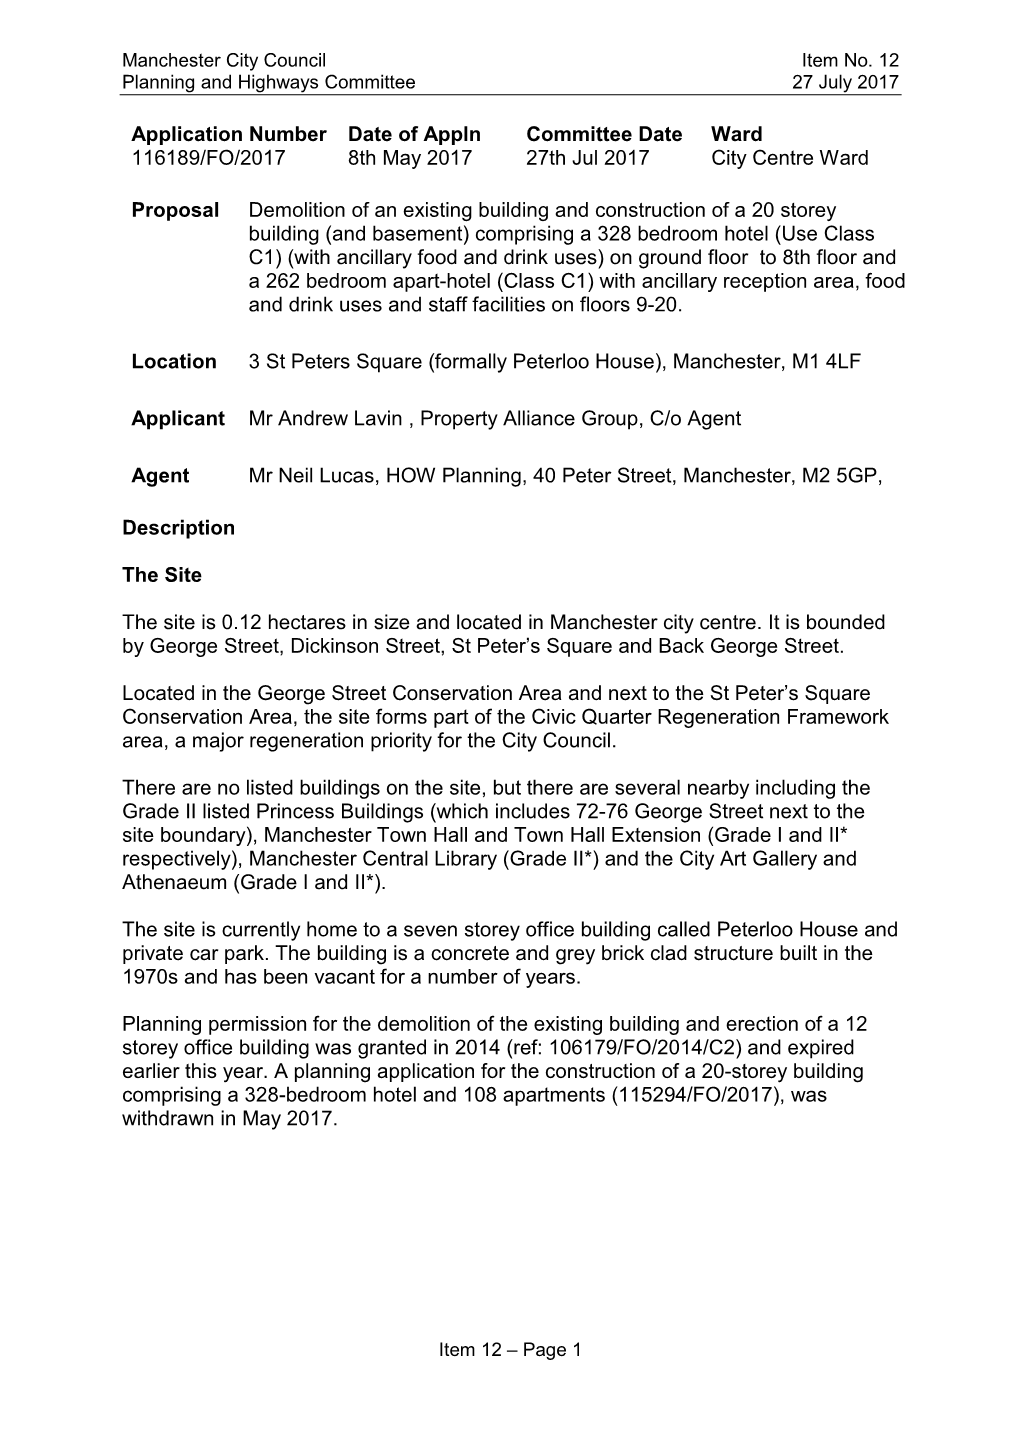 Planning and Highways Committee on 27 July 2017 Item 12. 3 St Peter's